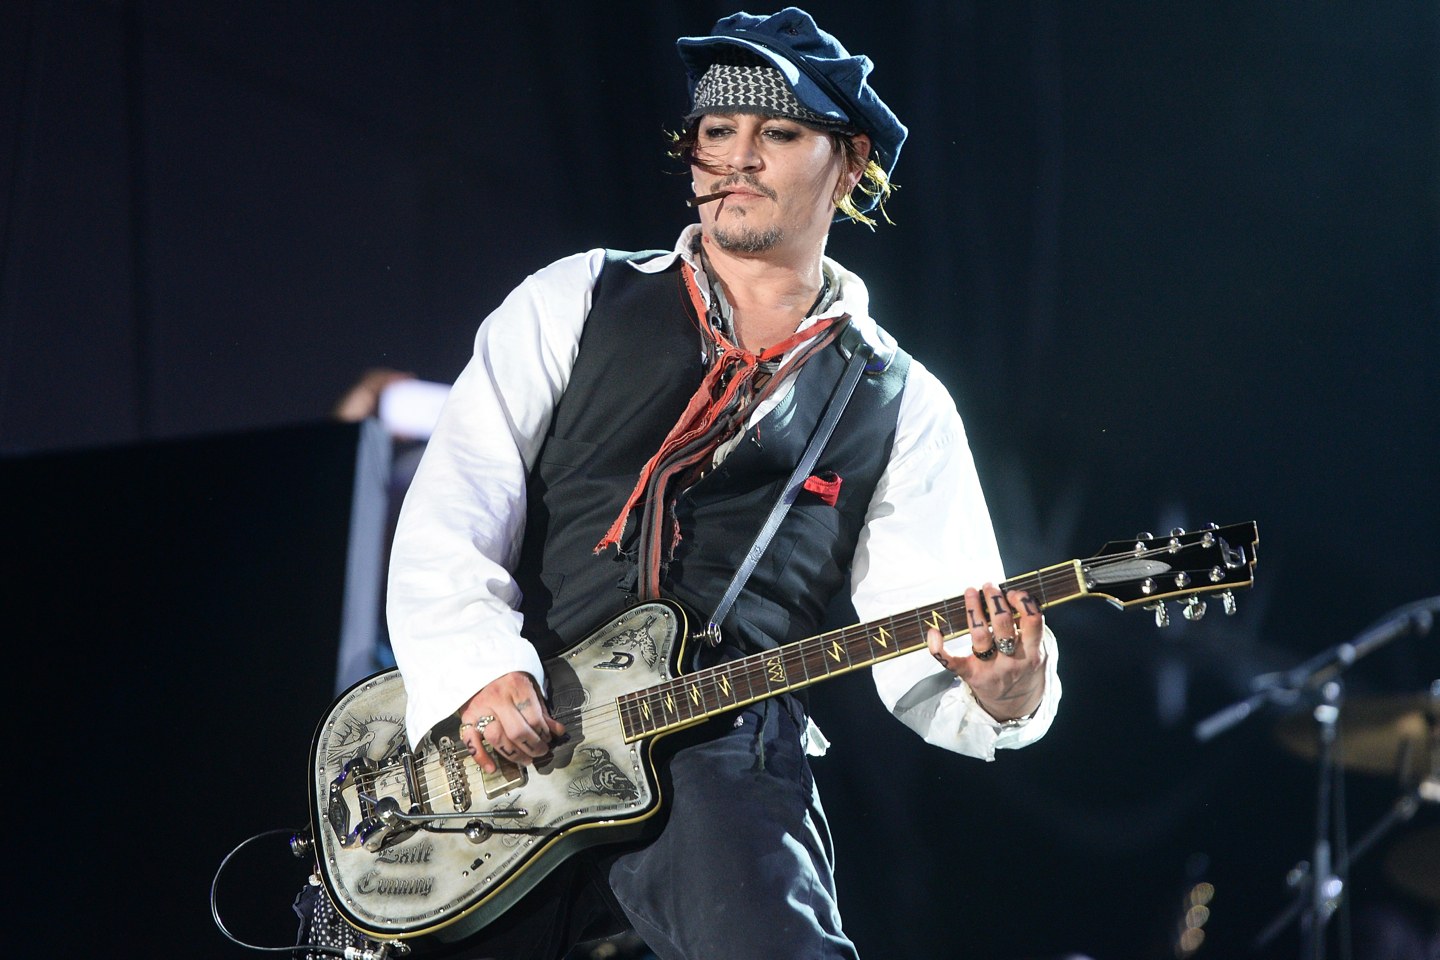 Decide If These Male Celebs Are Attractive to Find Out What Your ❤️ Romantic Personality Is johnny depp playing guitar